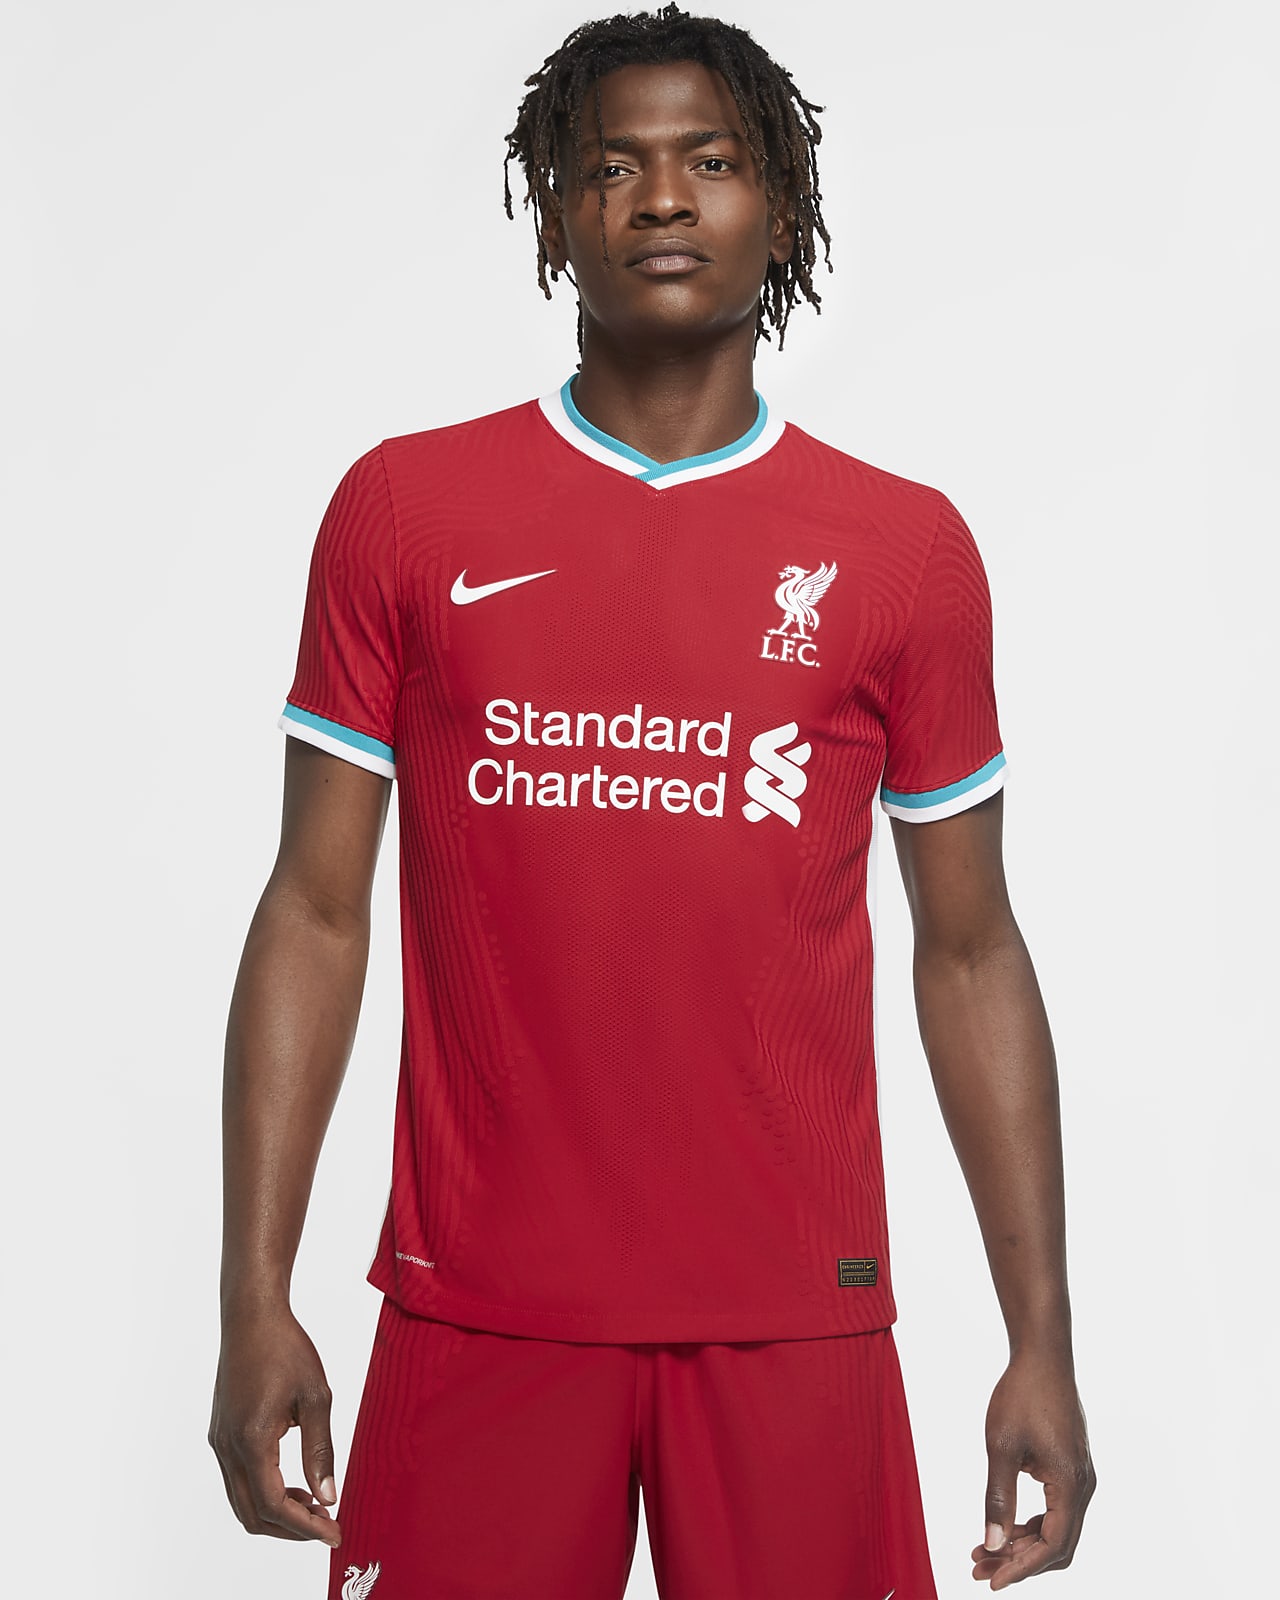 Liverpool Fc Kit 21/22 : LEAKED: Nike Liverpool 21-22 Third Kit To Be ...